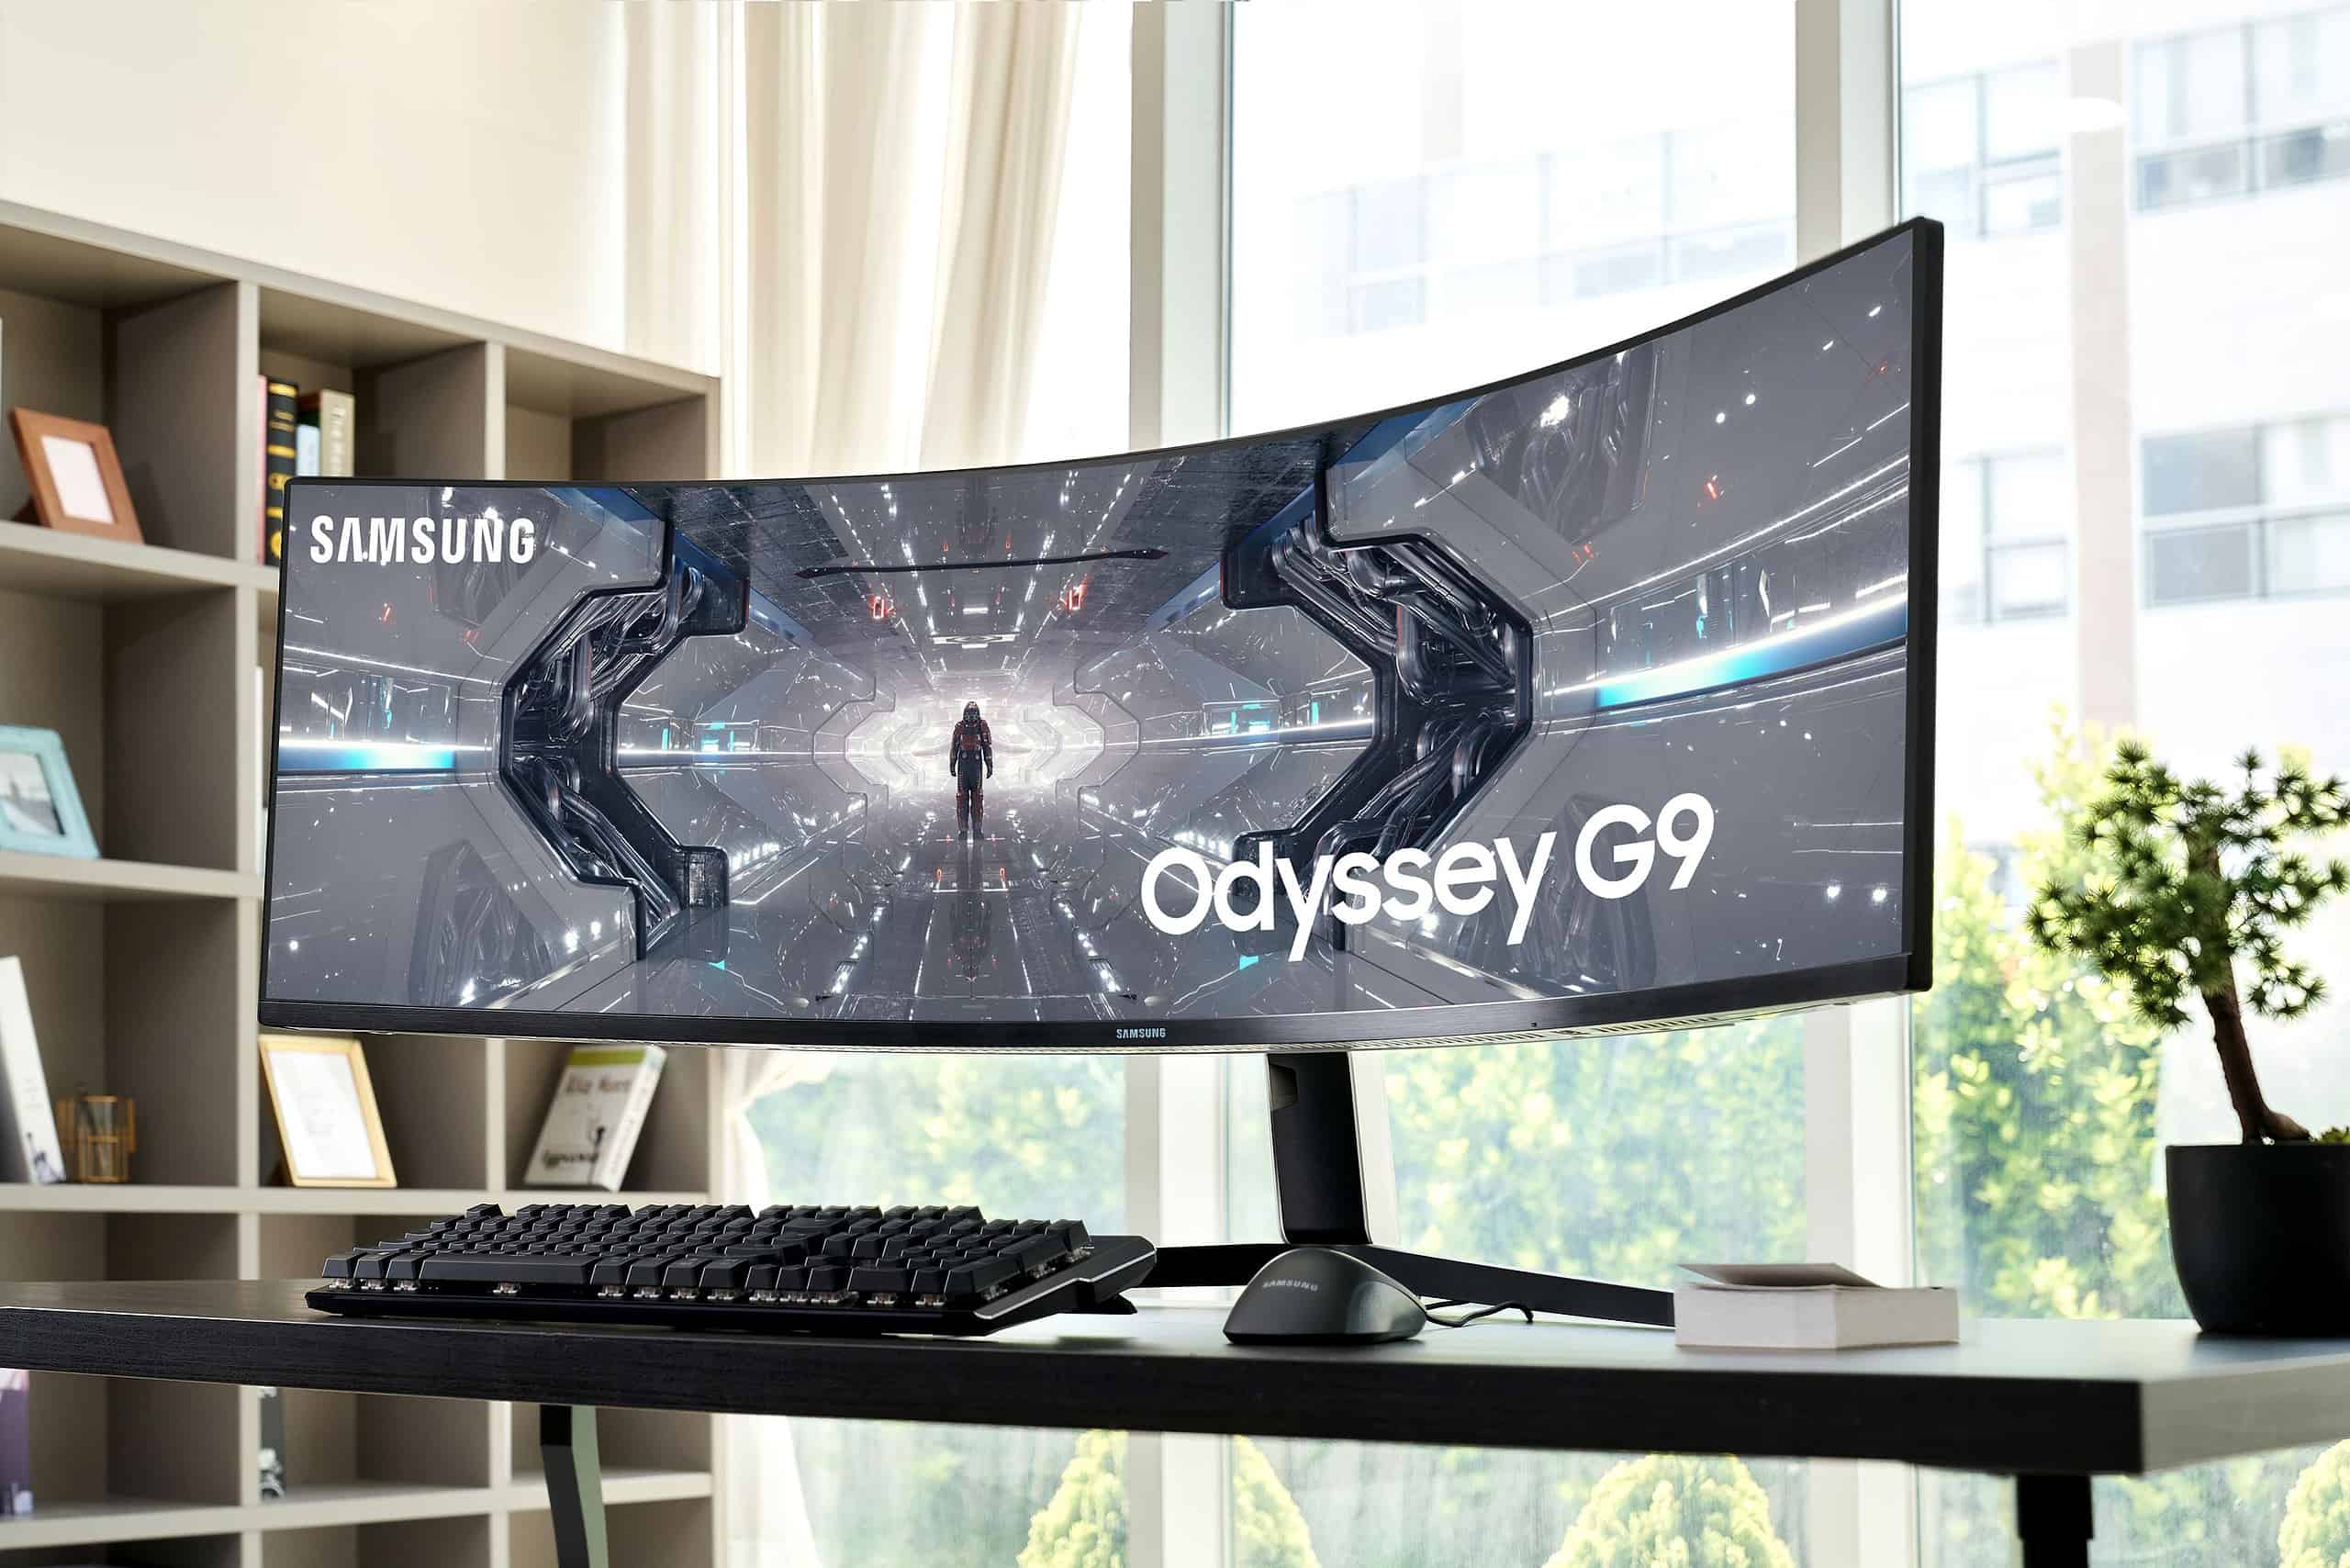 The Samsung 49” Odyssey G9 Curved Monitor is down to its historic lowest-ever price